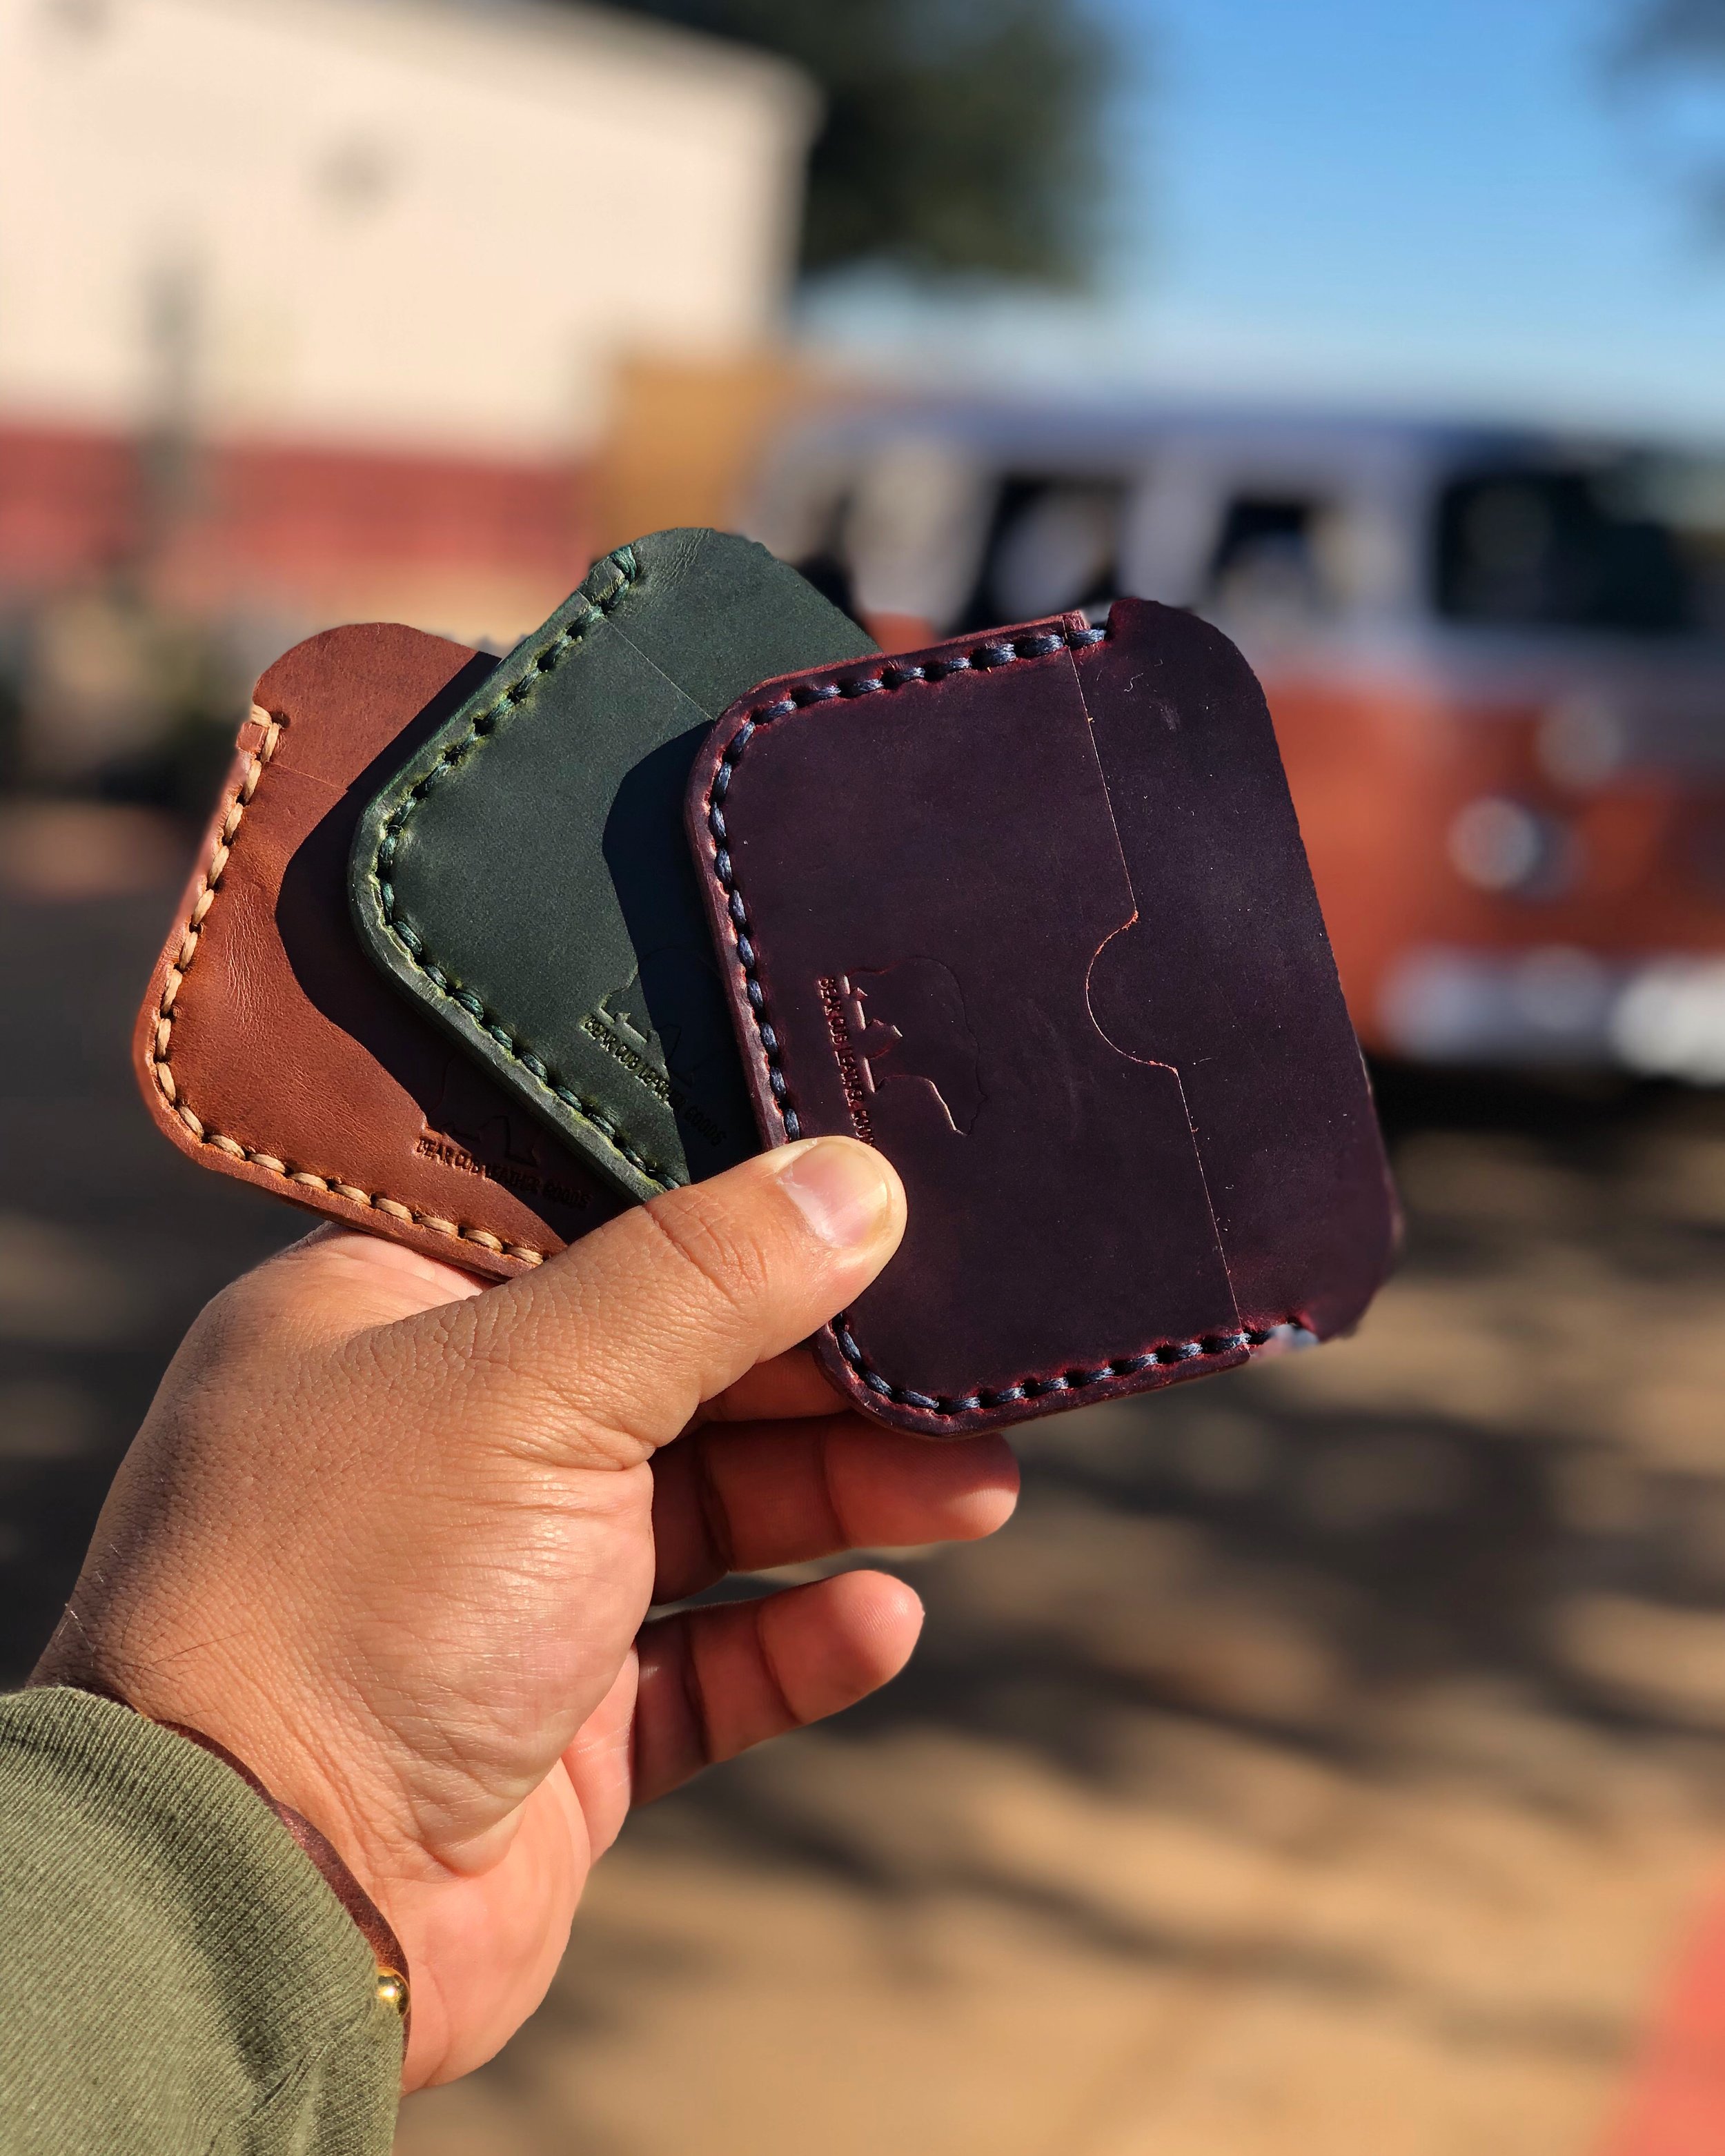 Handmade leather wallets with stitching handmade in Houston, Texas by Bear Cub Leather